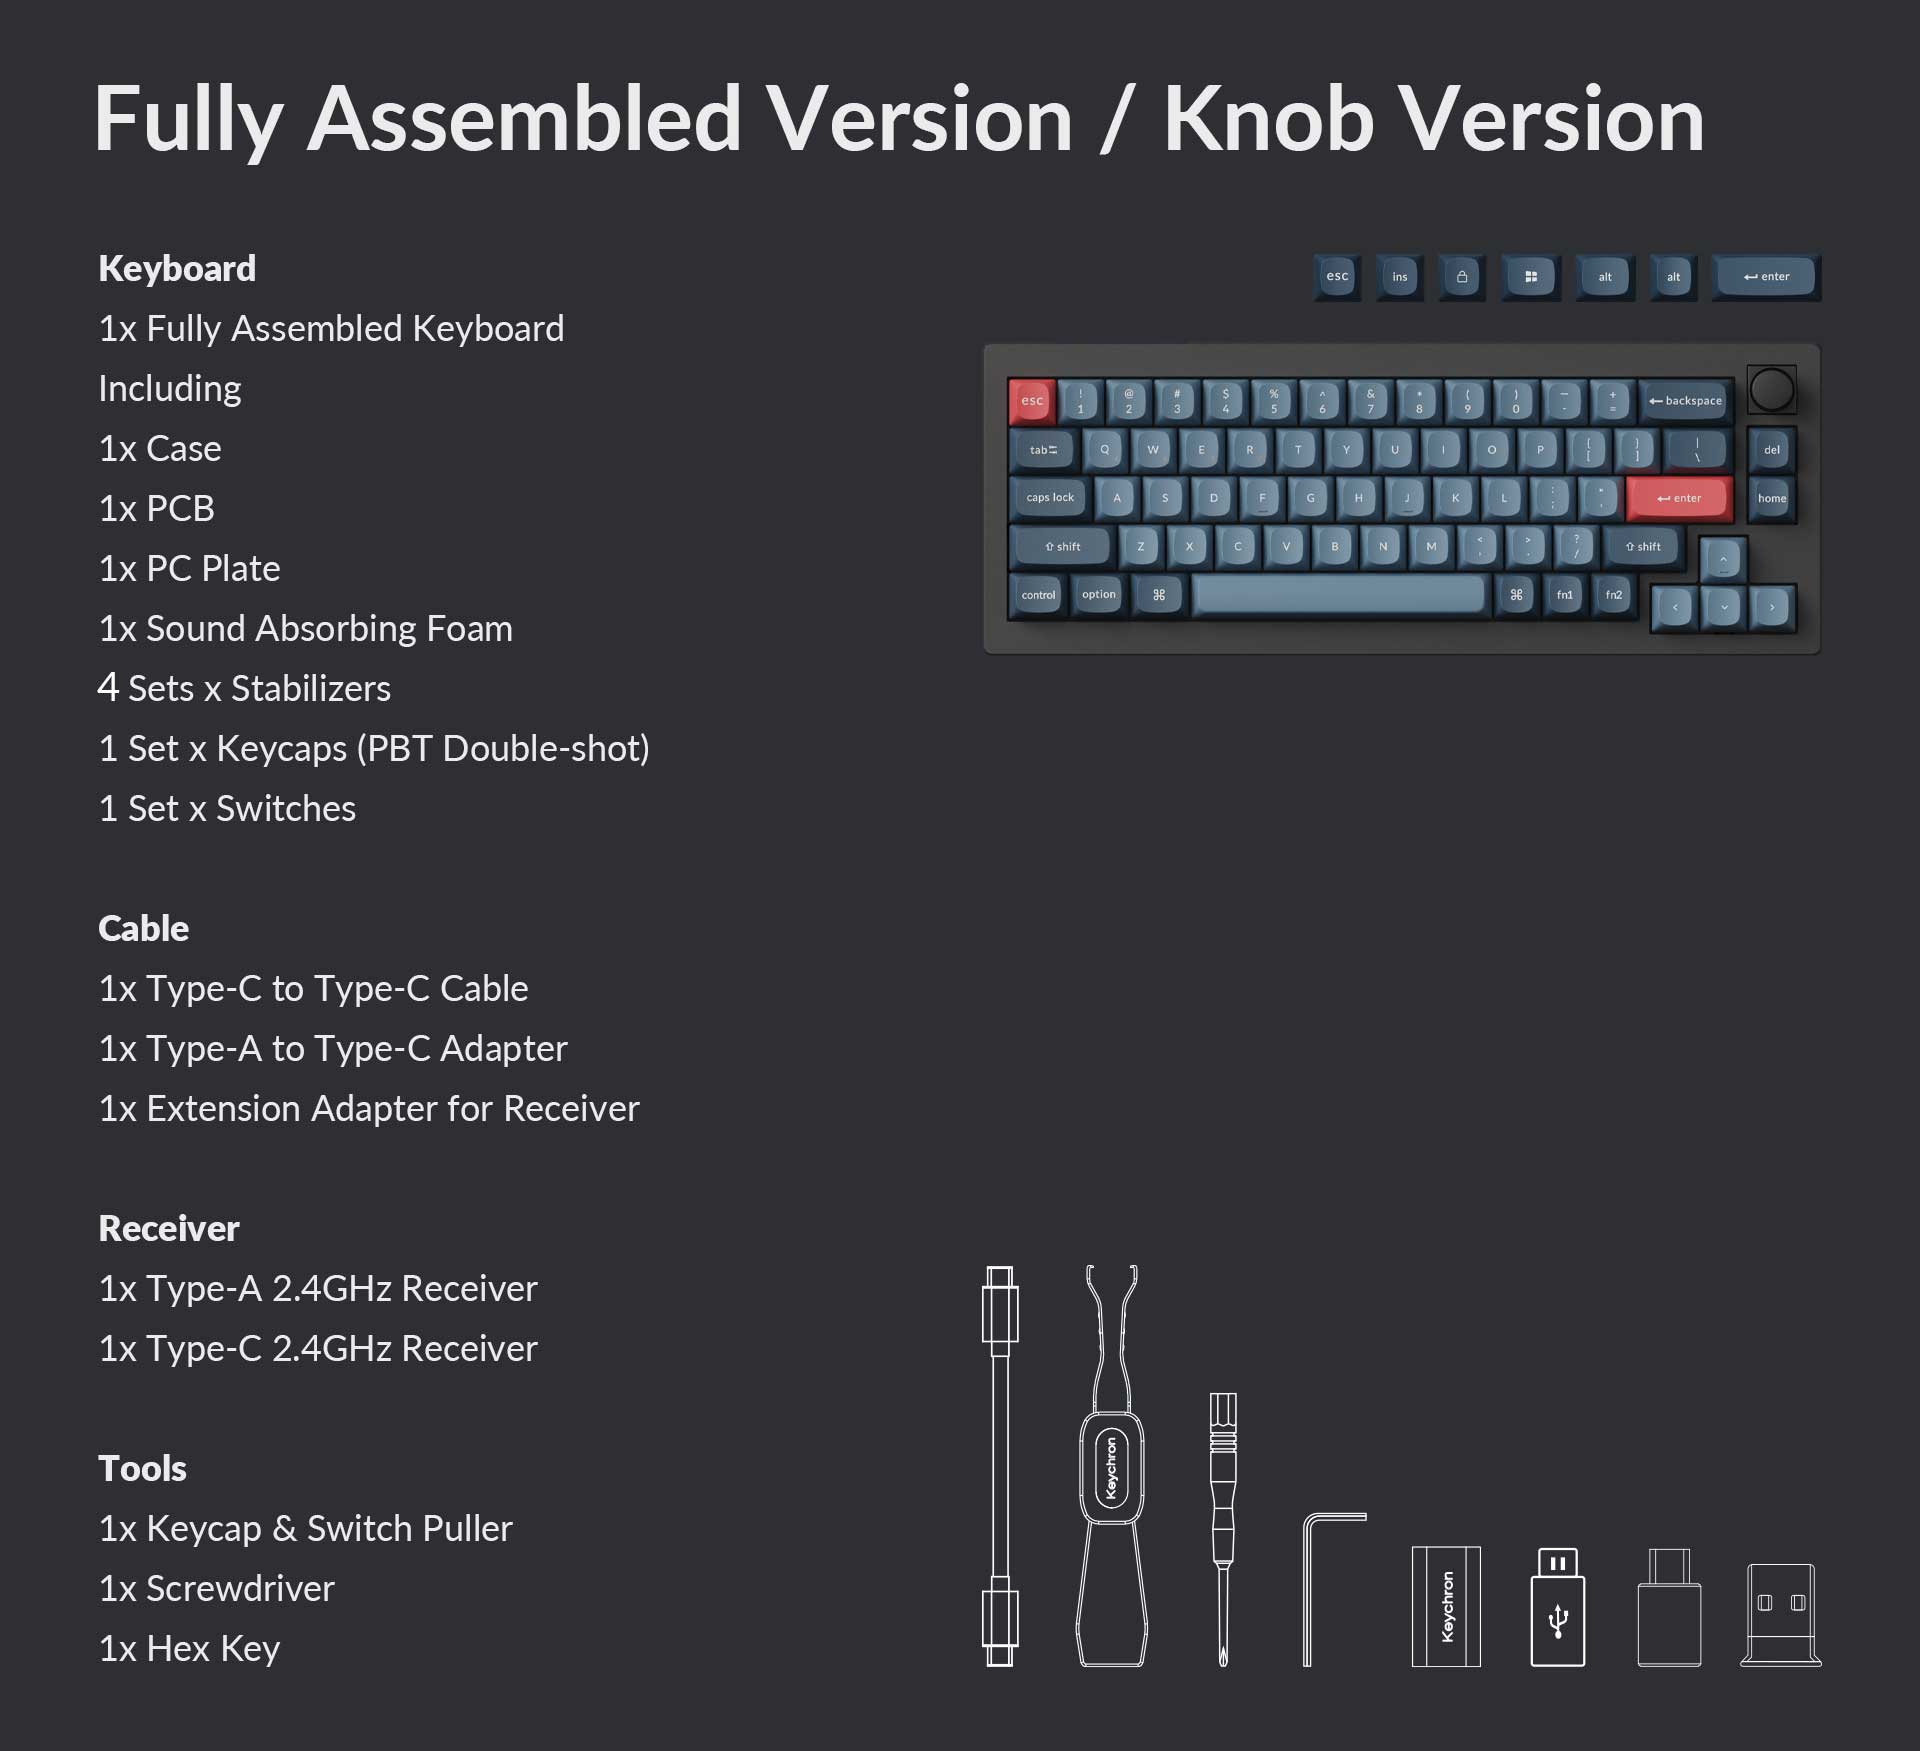 package-list-of-the-keychron-v2-max-fully-assembled-knob-version__PID:8d678c51-03f8-453b-abe6-0e11f5be4be9